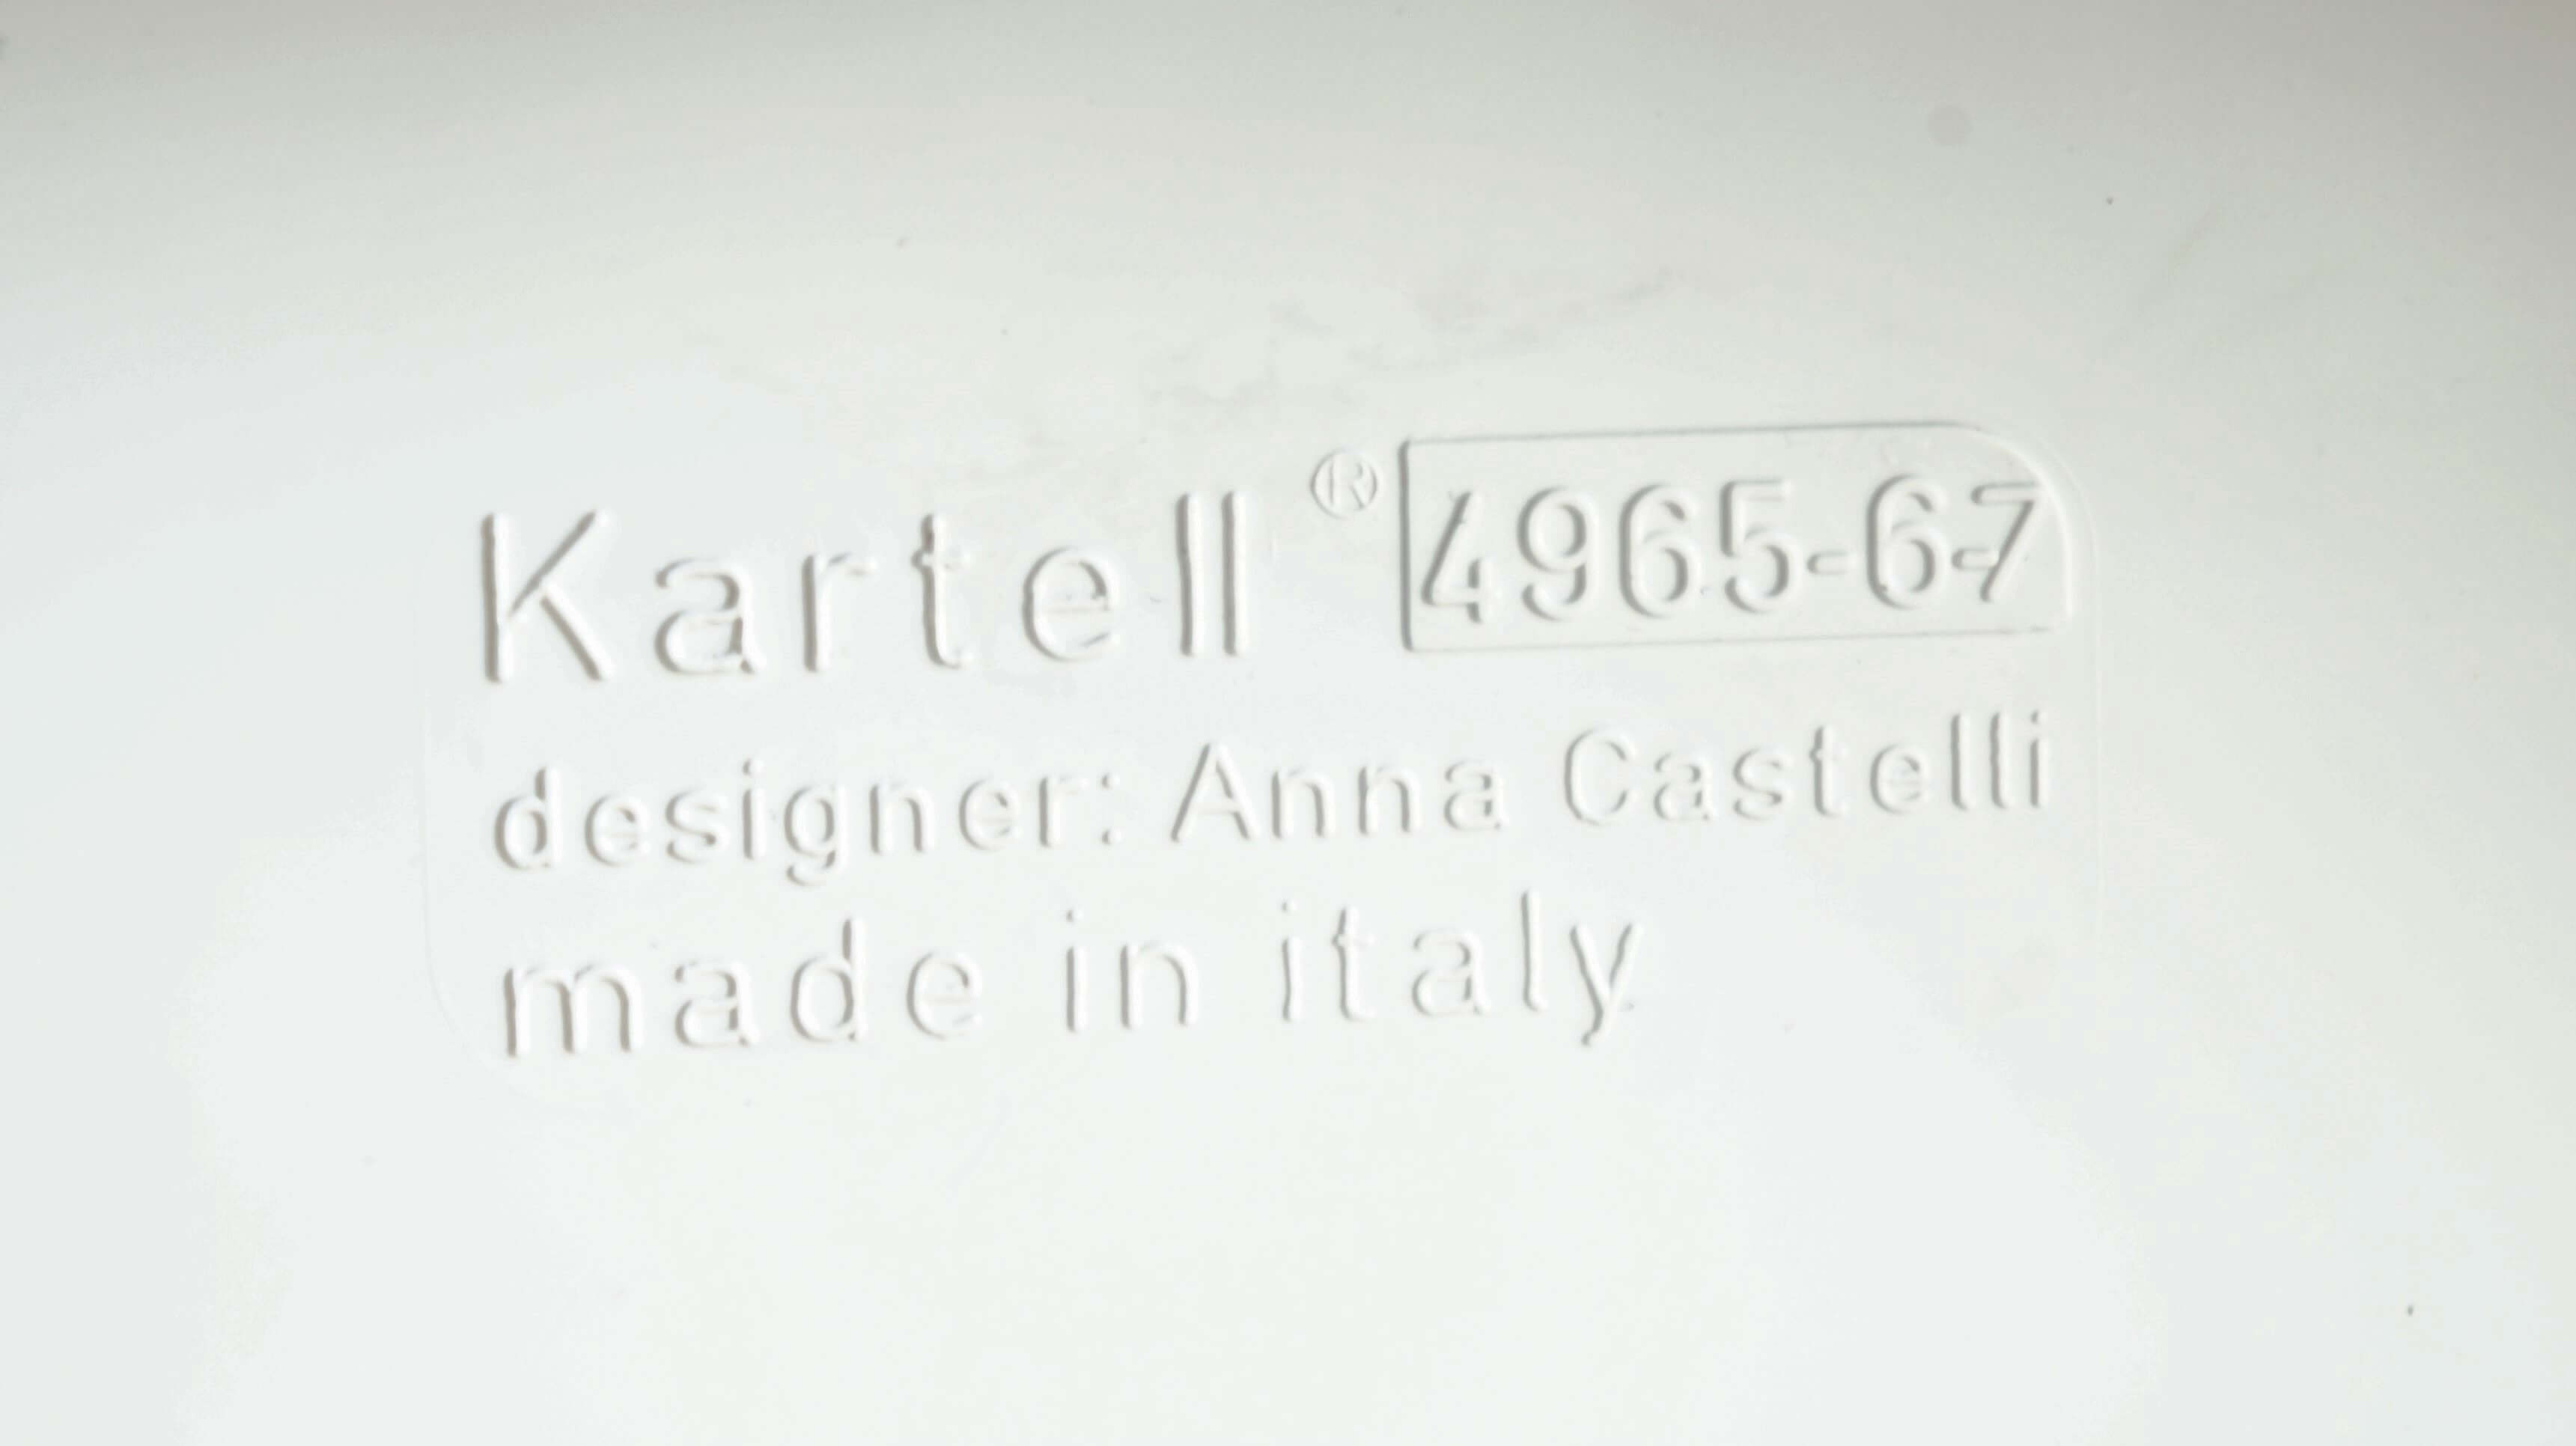 Kartell componibili 2 white designed by Anna Castelli Ferrieri/カルテル コンポニビリ2 白 アンナ・カステッリ・フェリエーリ デザイン